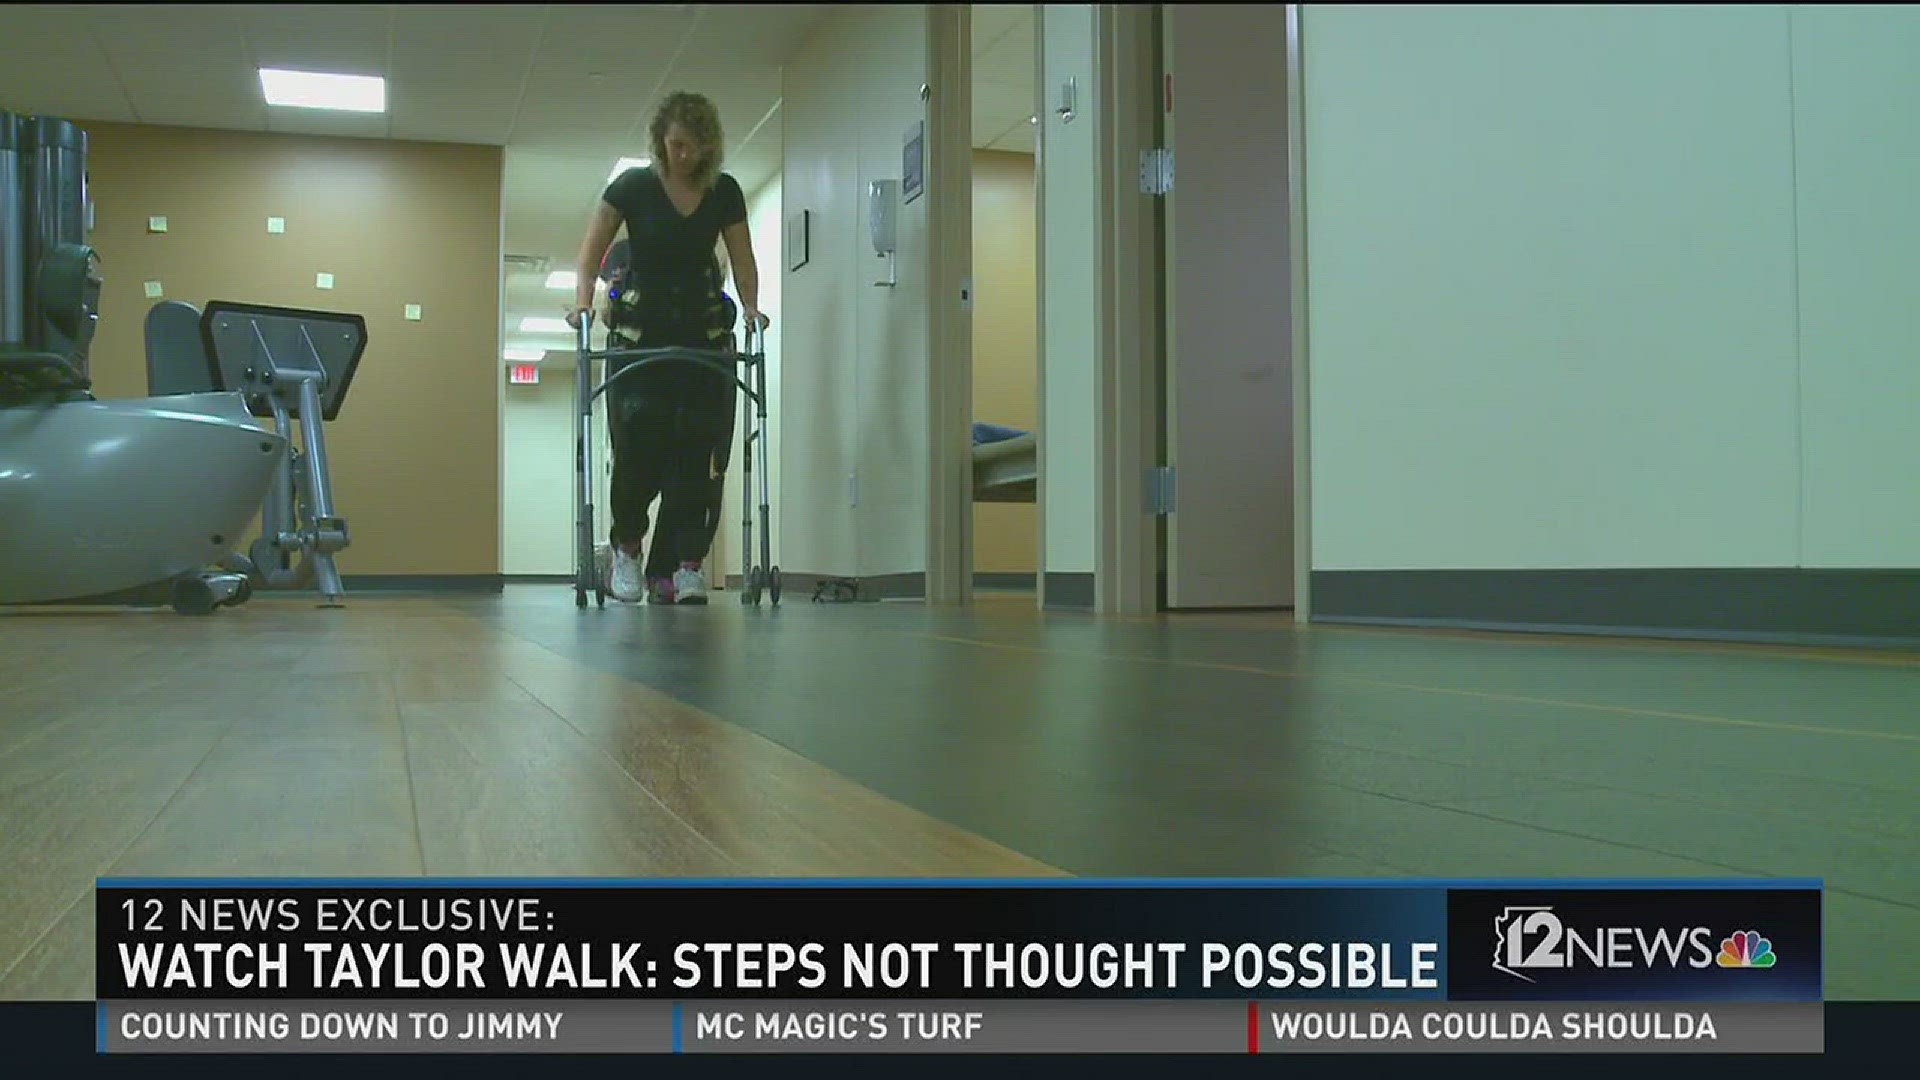 Watch Taylor Walk: Steps not thought possible.